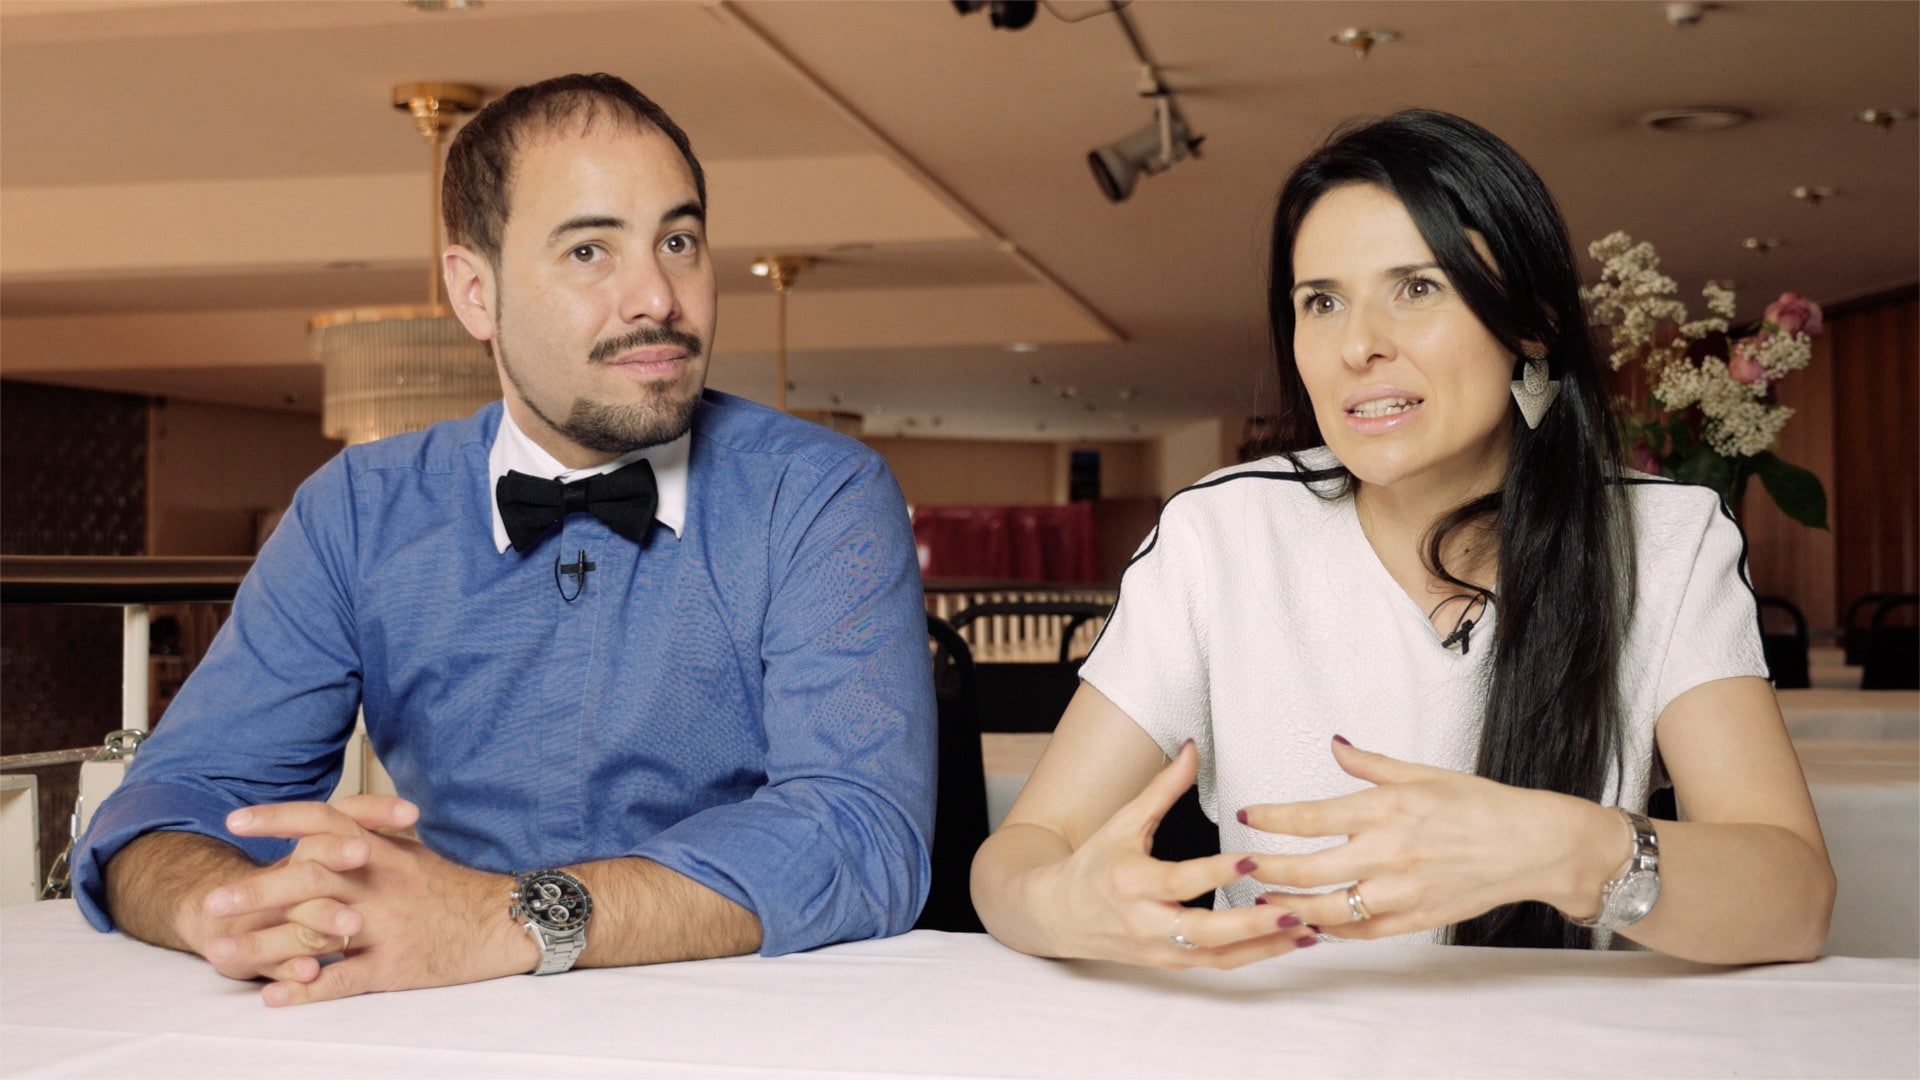 Cristina Sosa and Daniel Nacucchio about the role of the woman in Tango » 030tango Short